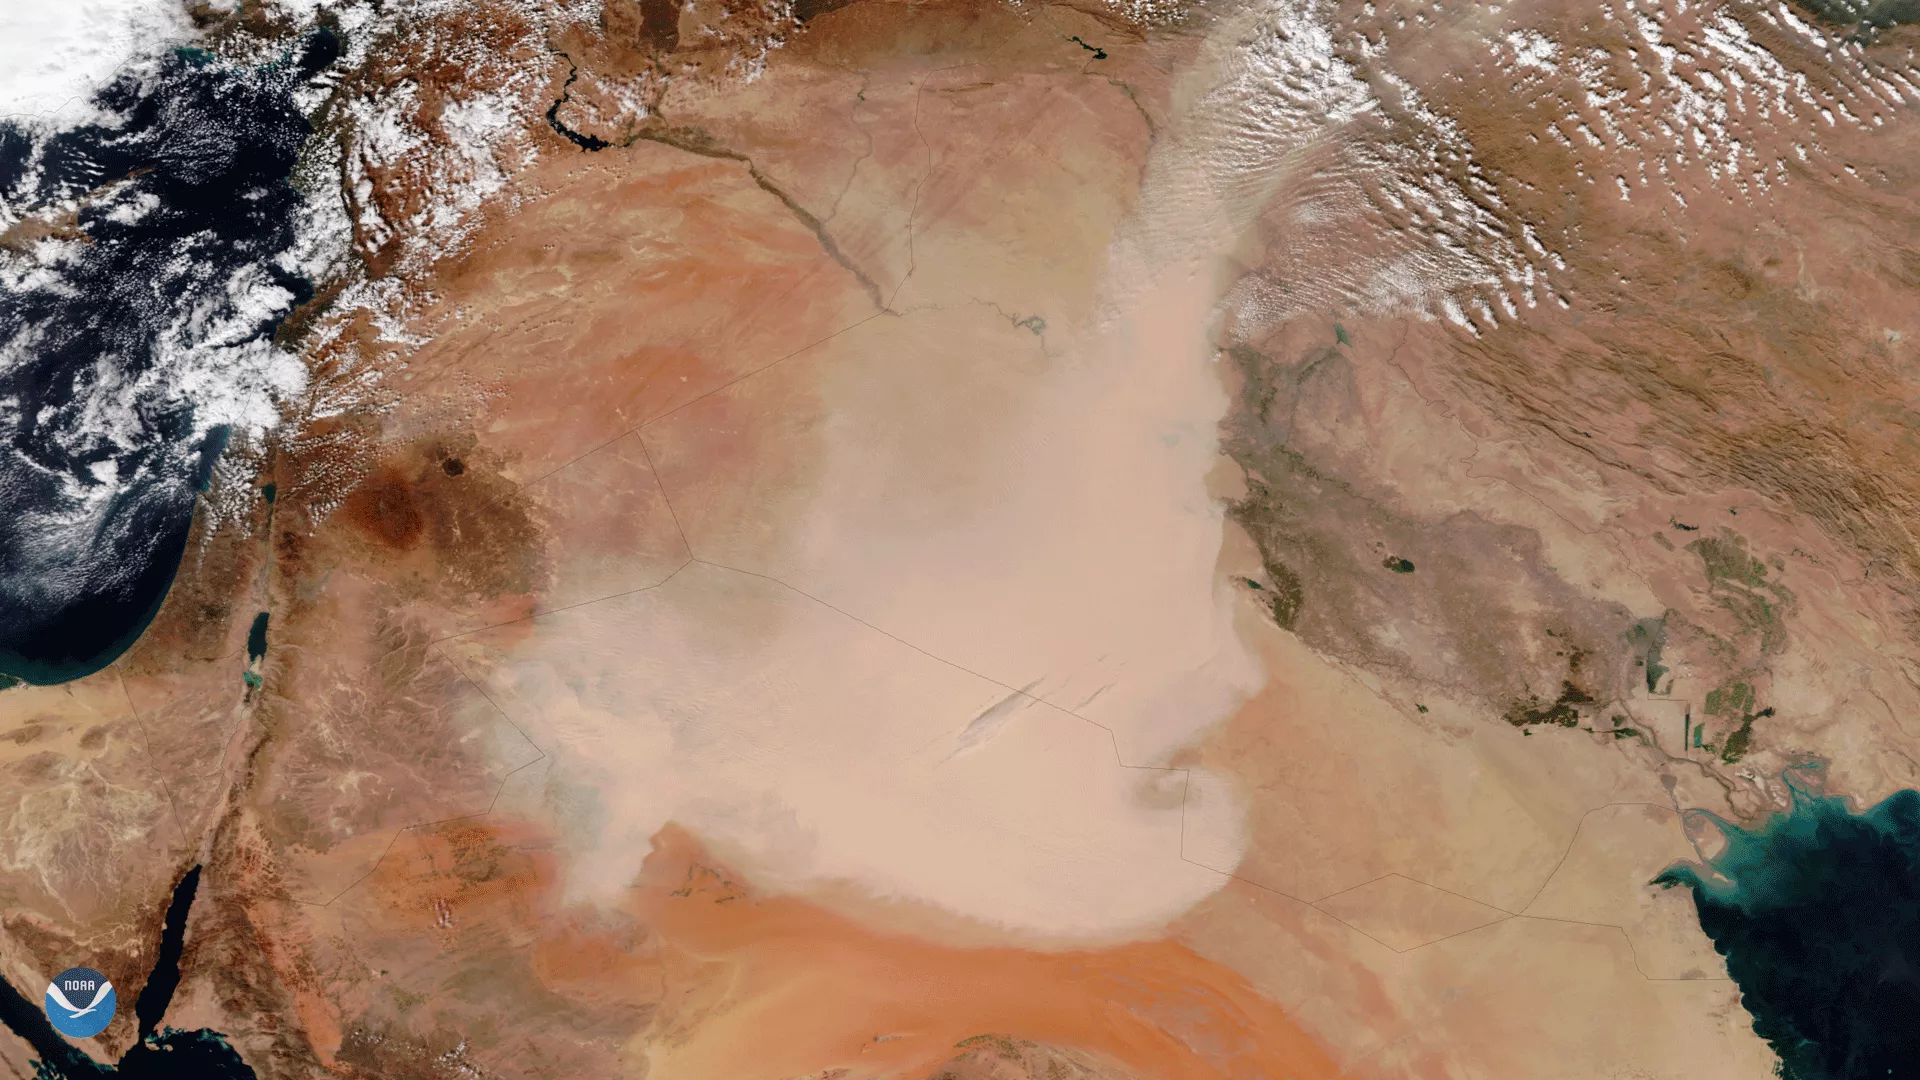 Image of sandstorm over the middle east